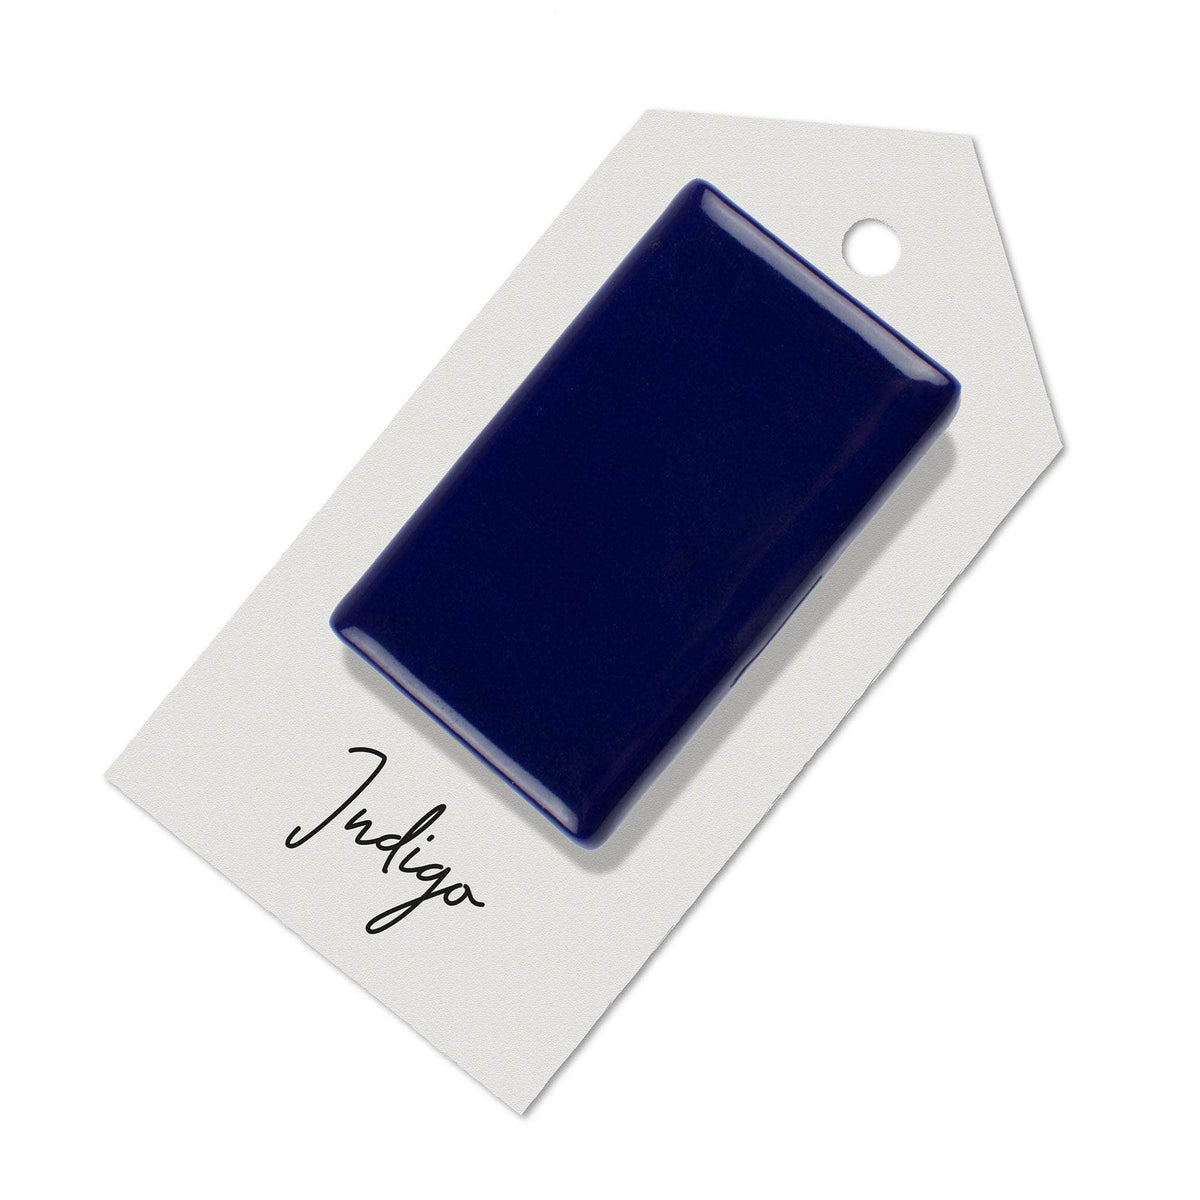 Indigo sample for Aga range cooker re-enamelling &amp; reconditioned cookers